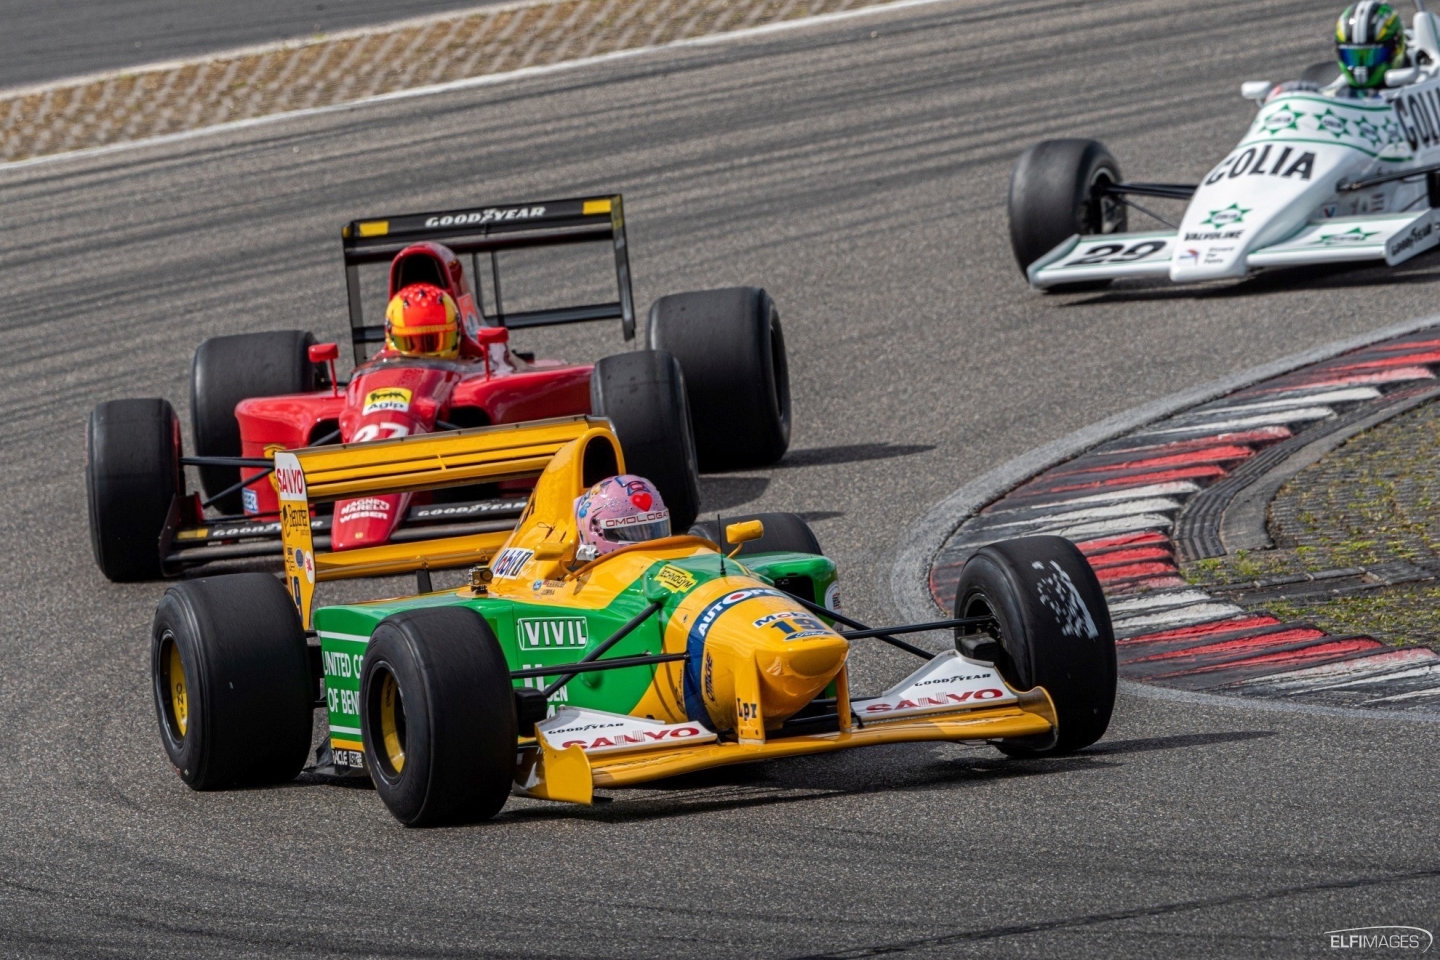 'The Force' brings extraordinary F1 cars to the TABAC Classic GP Assen